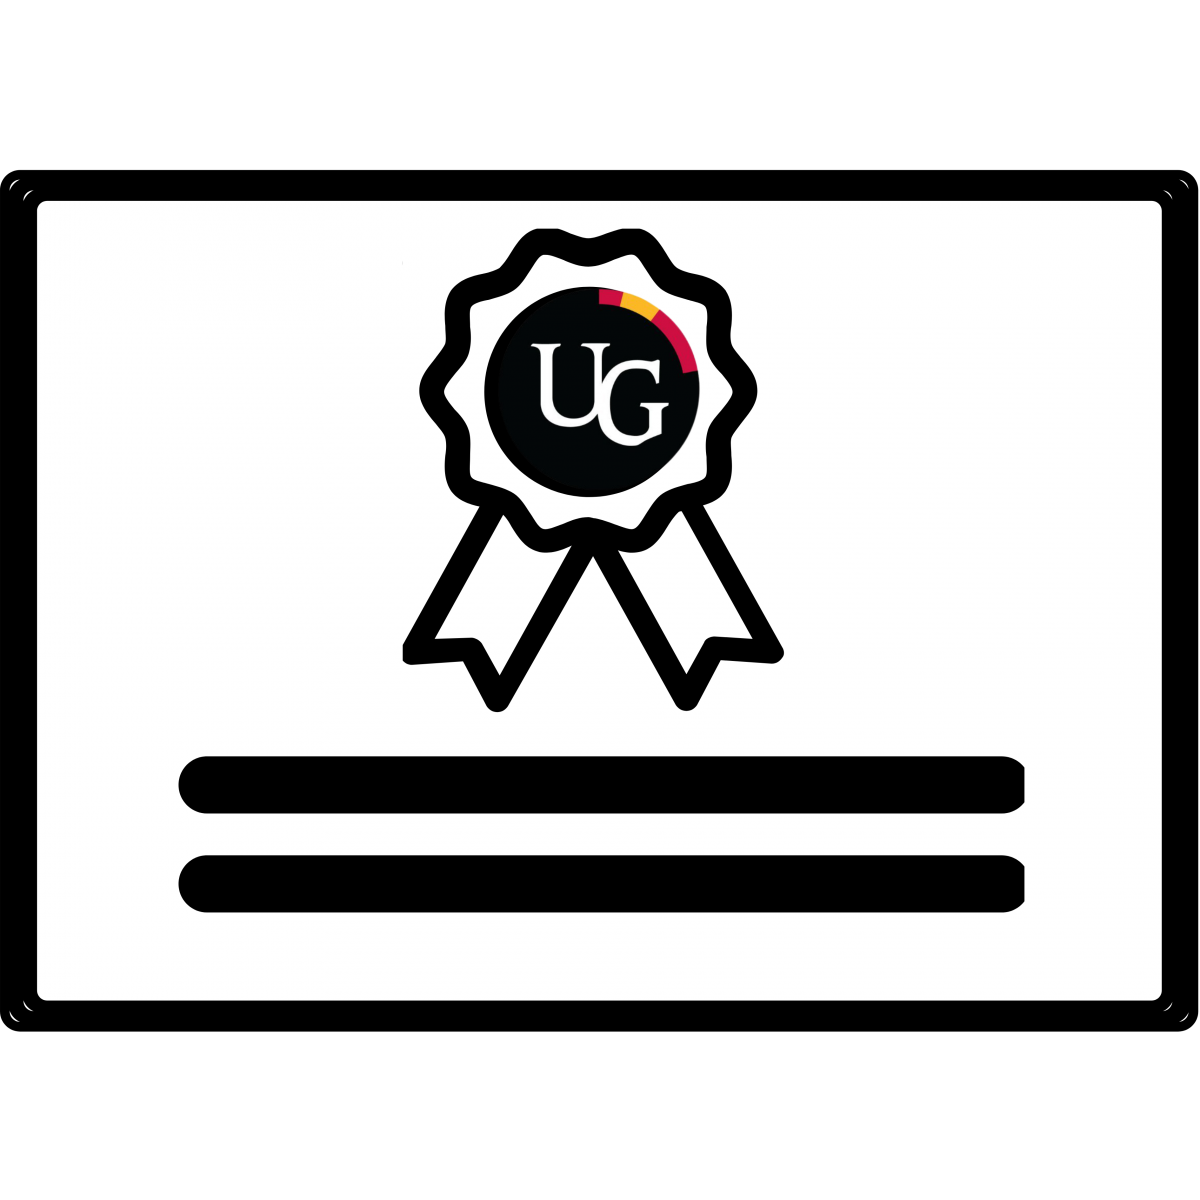 A certificate award with University of Guelph logo.